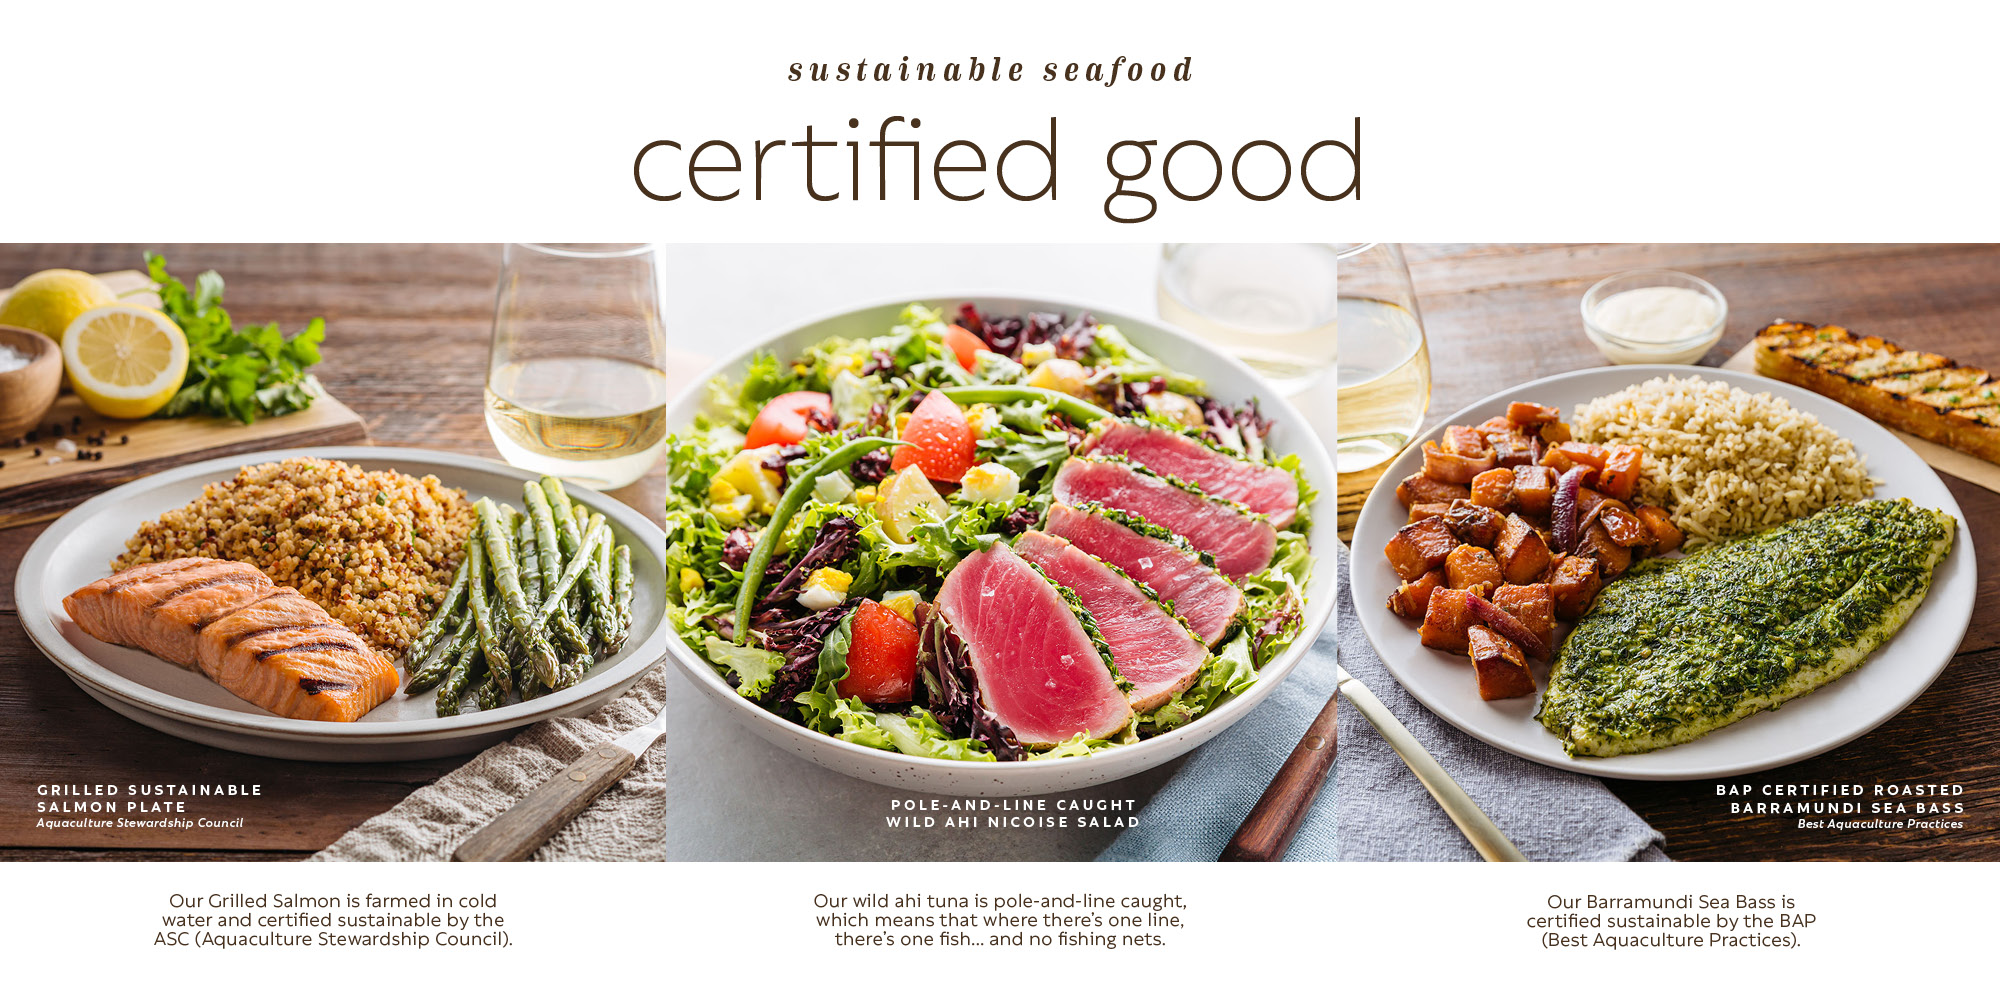 Sustainable seafood. Certified good.